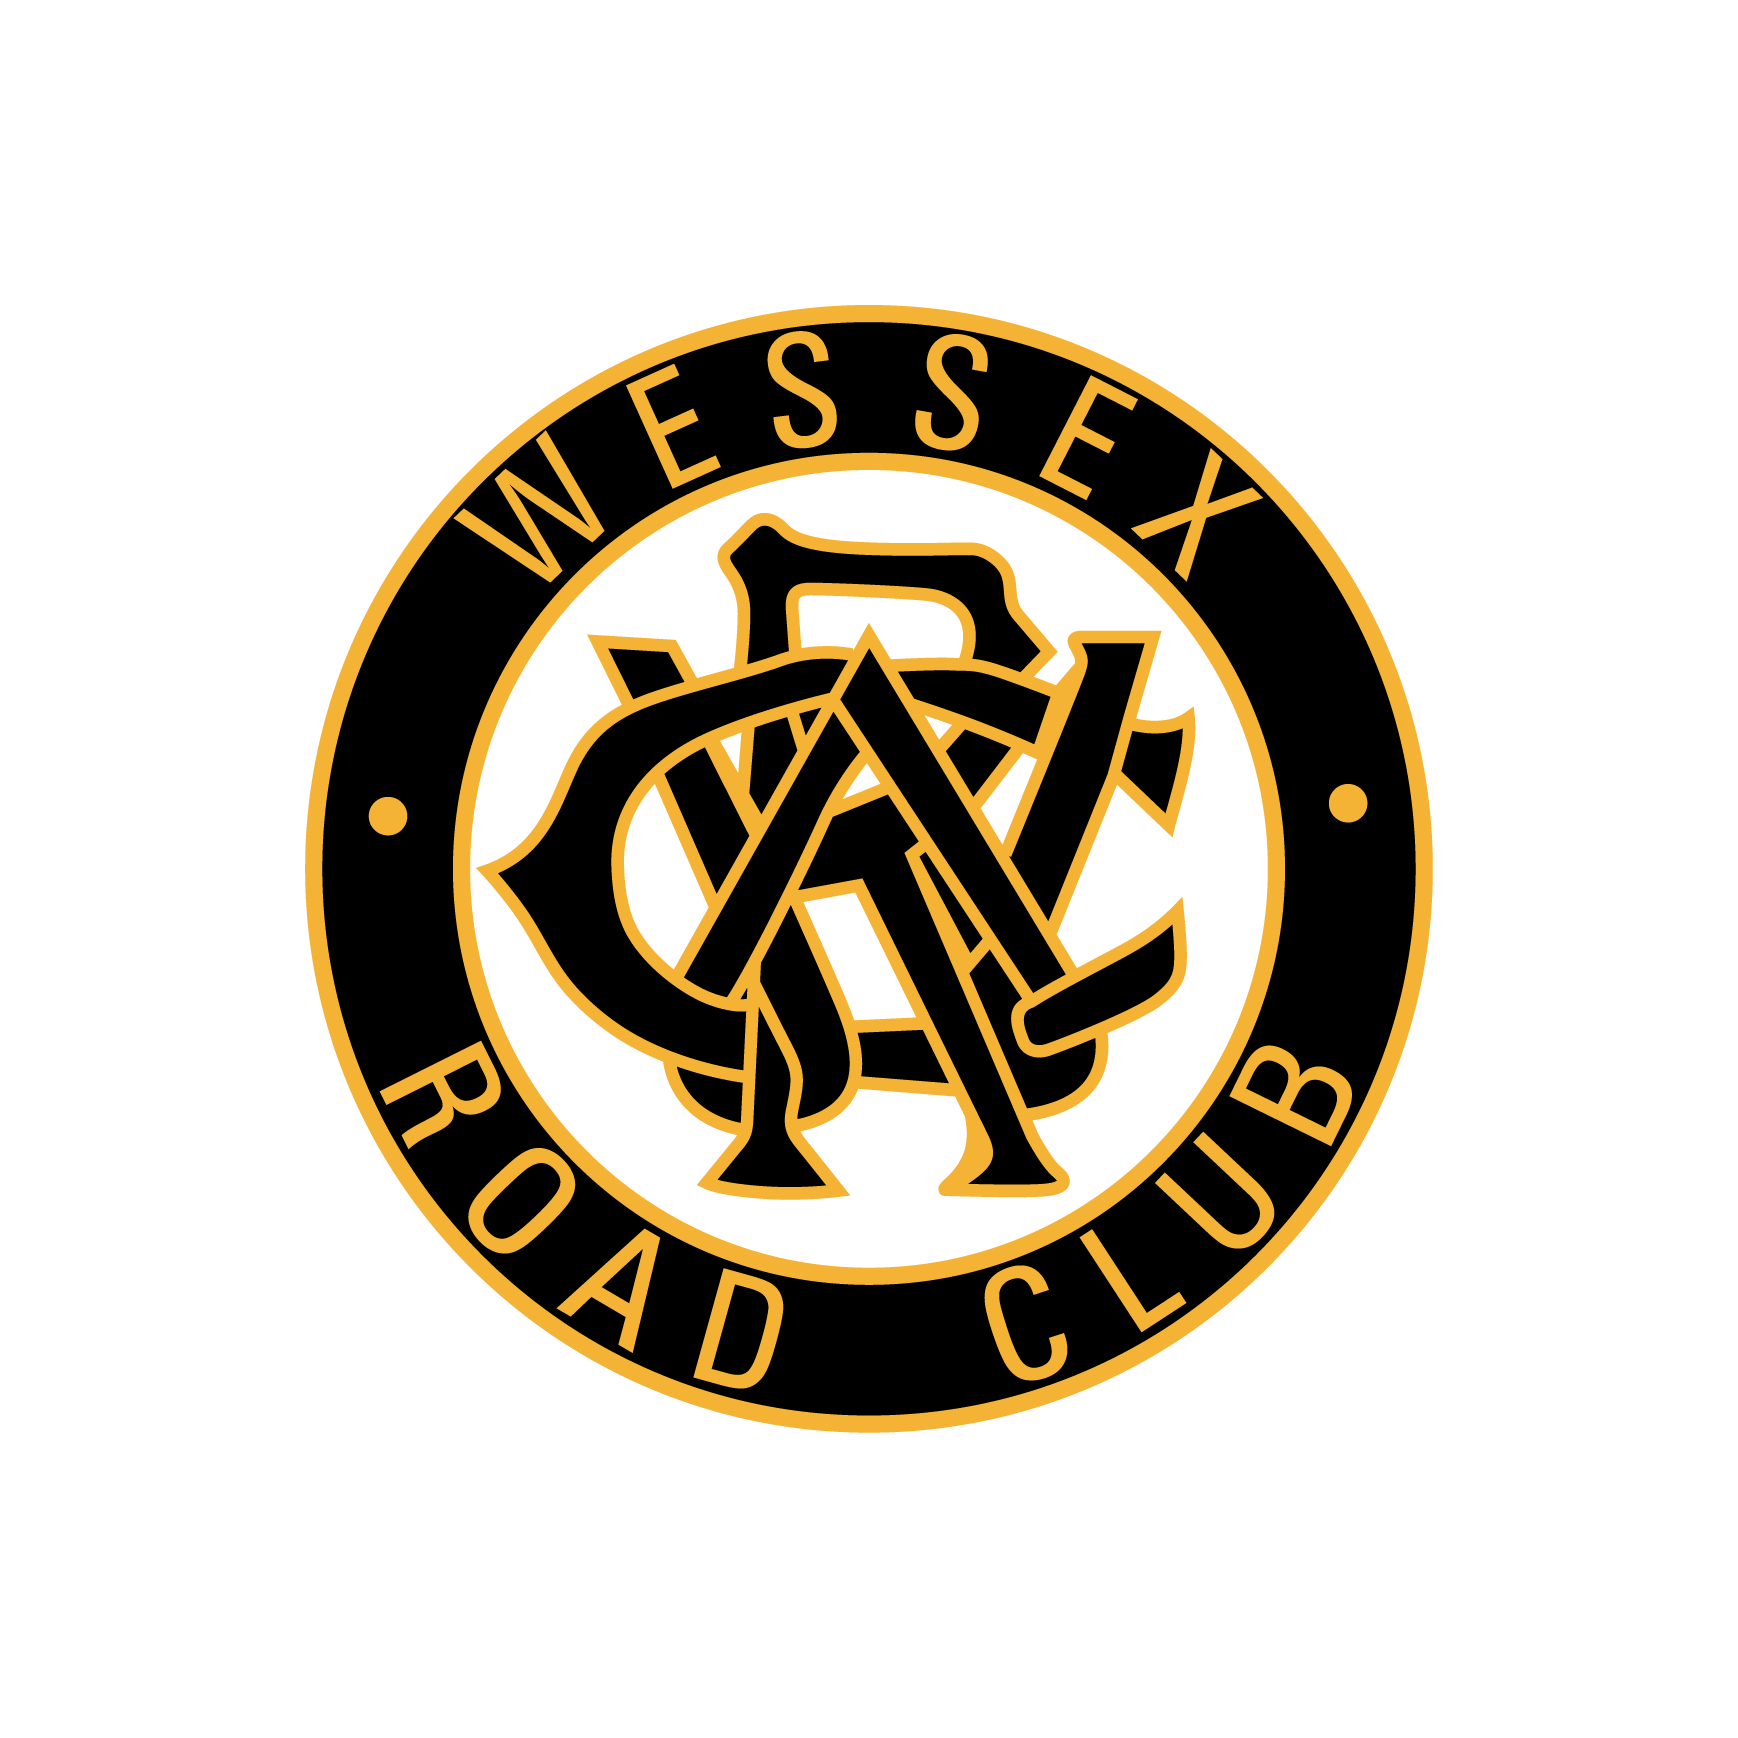 Club Image for WESSEX RC